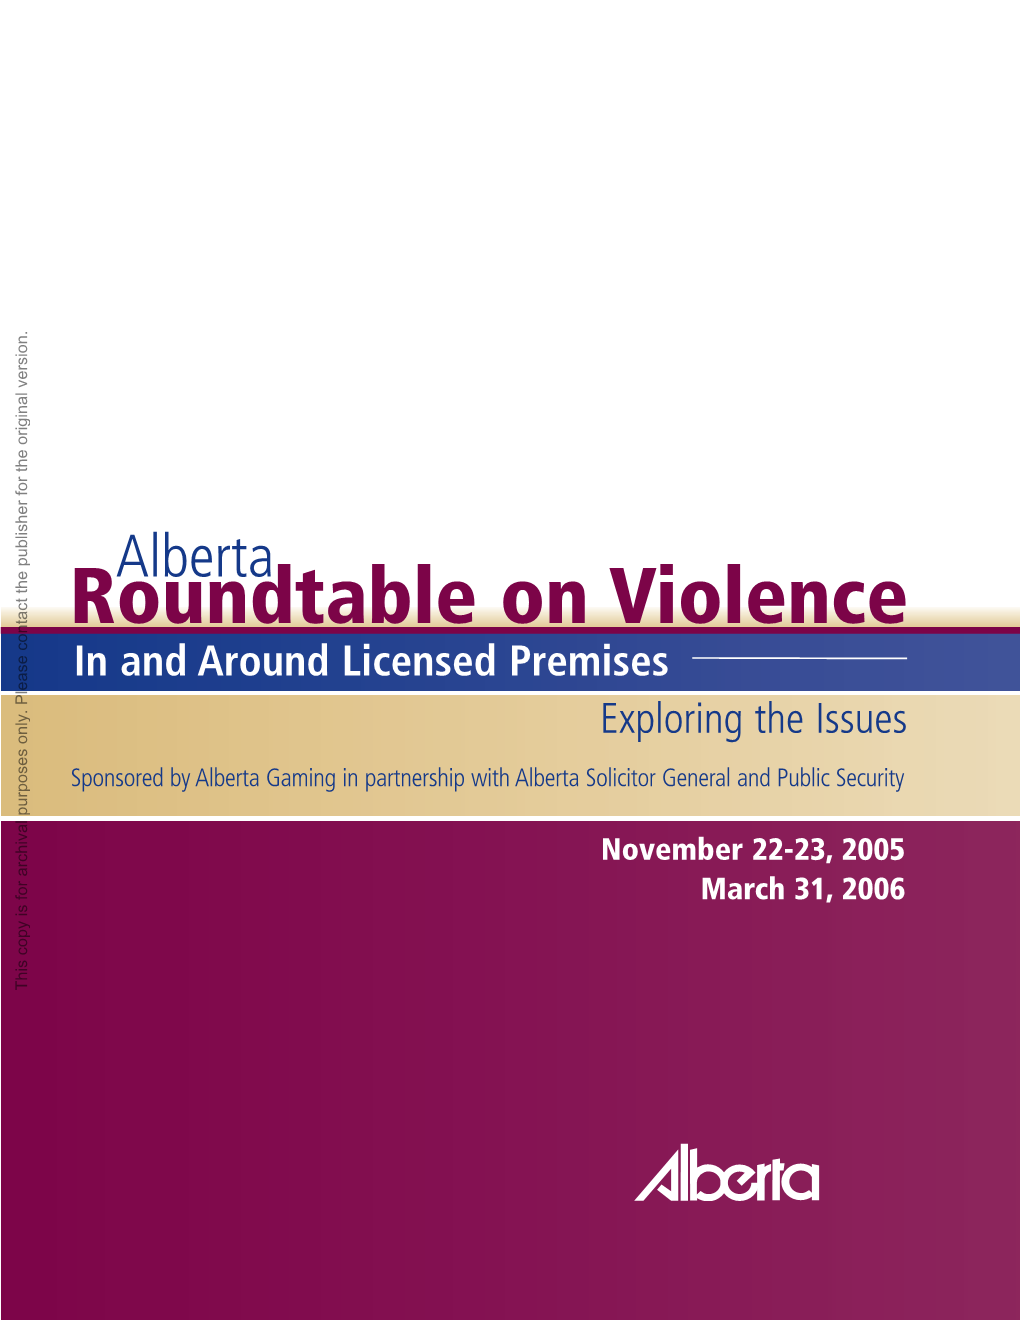 Alberta Roundtable on Violence in and Around Licensed Premises